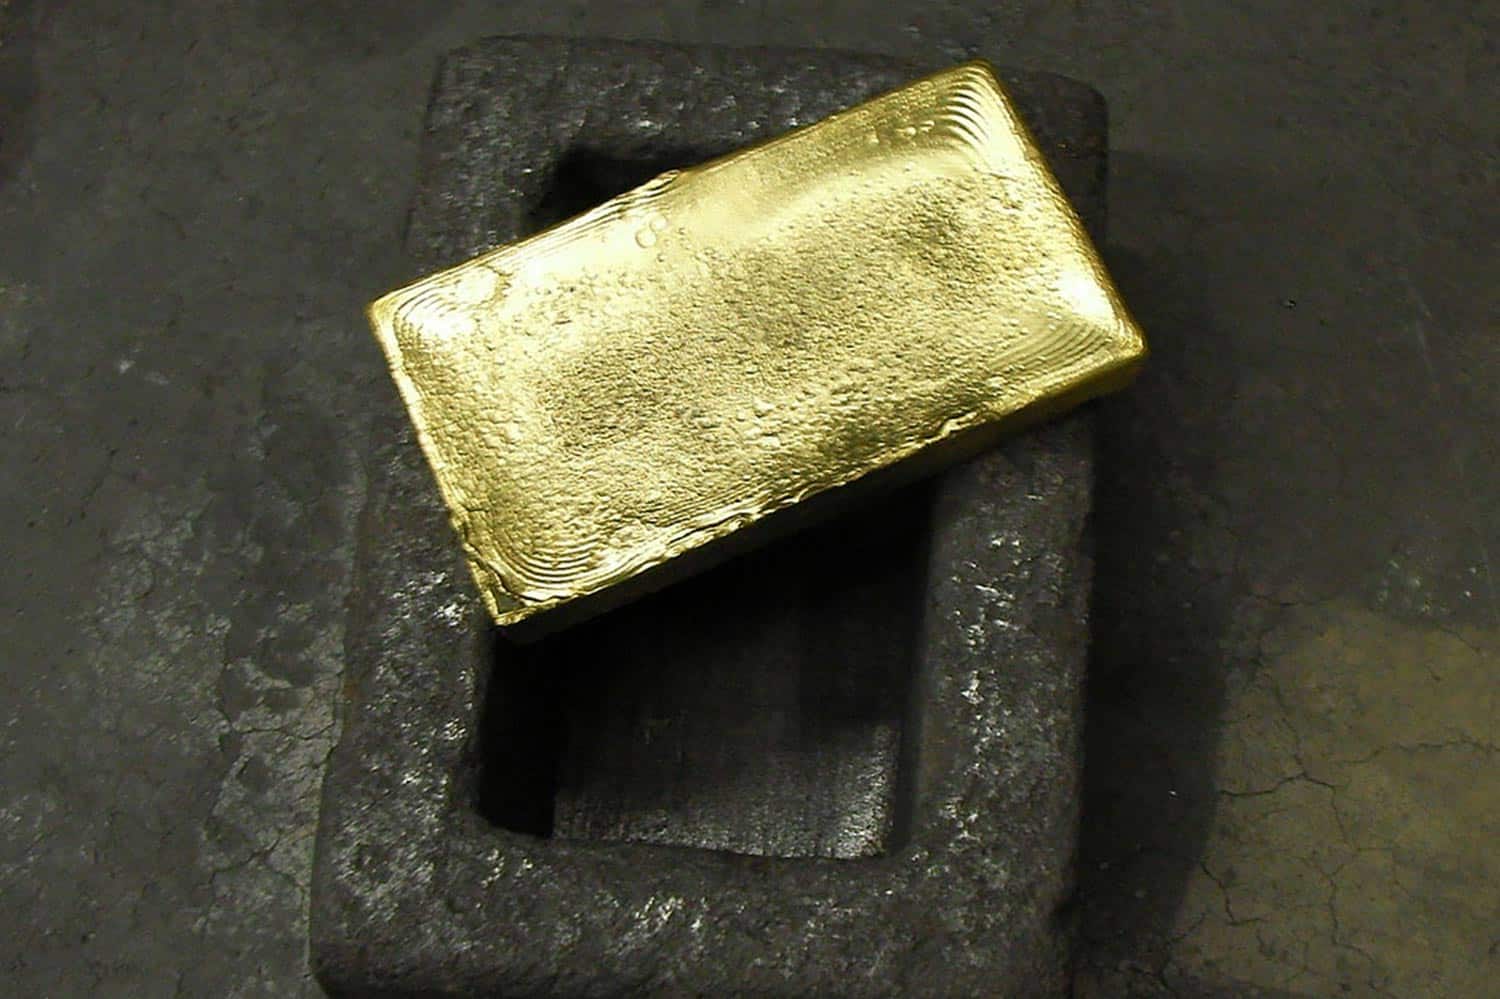 a gold bar fresh out of a mold